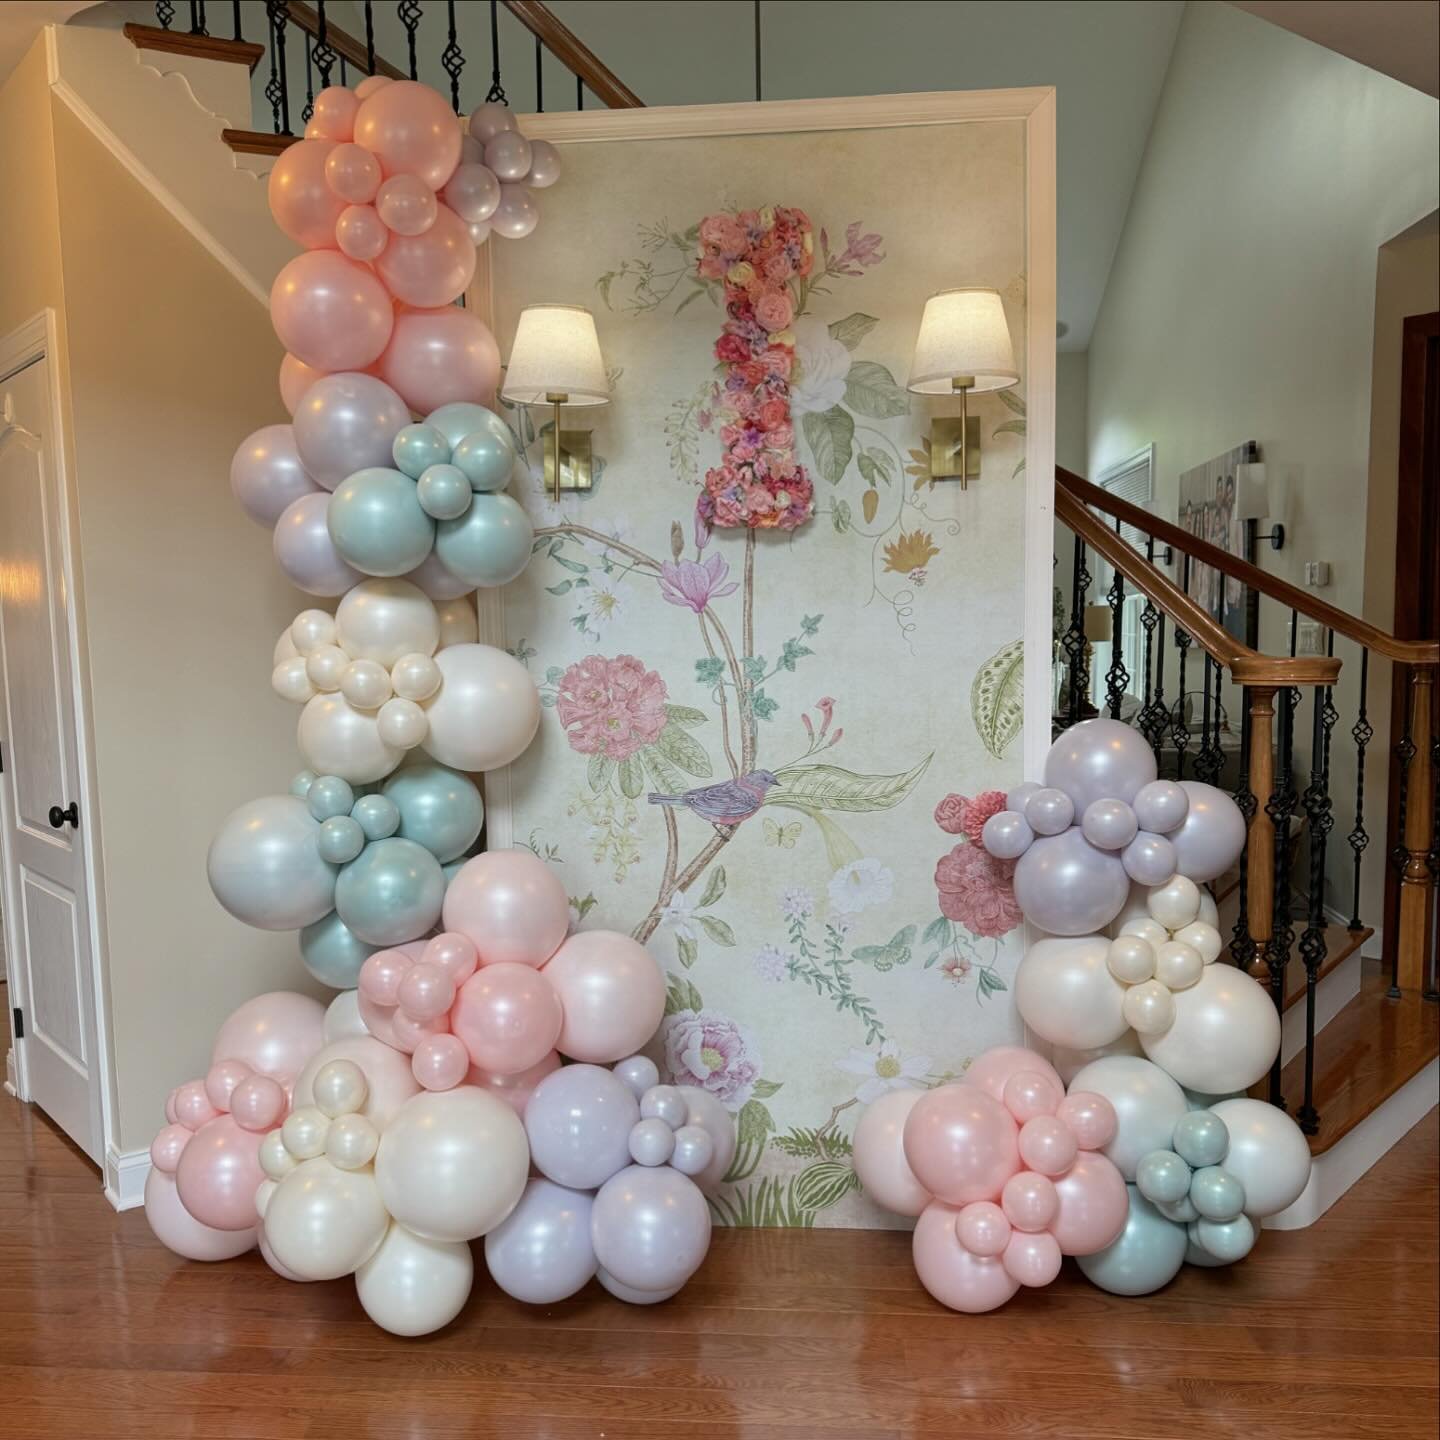 Balloon garland to compliment their Baptism decor!

Display Wall: @sweetmemoriesphilly